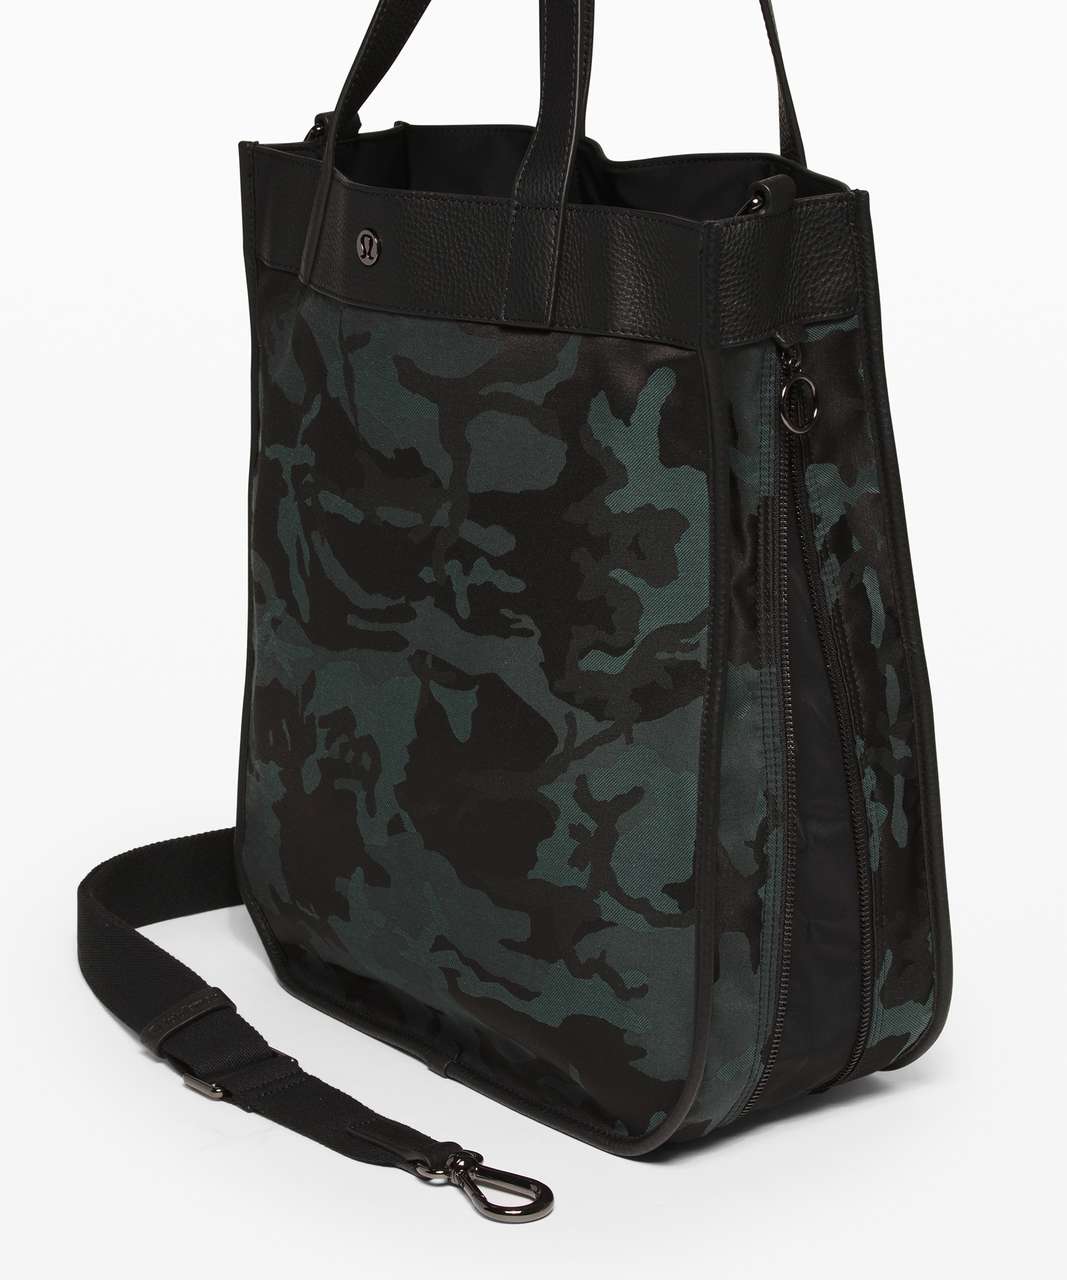 Lululemon Now and Always Tote *15L - Jacquard Camo Cotton Obsidian / Black